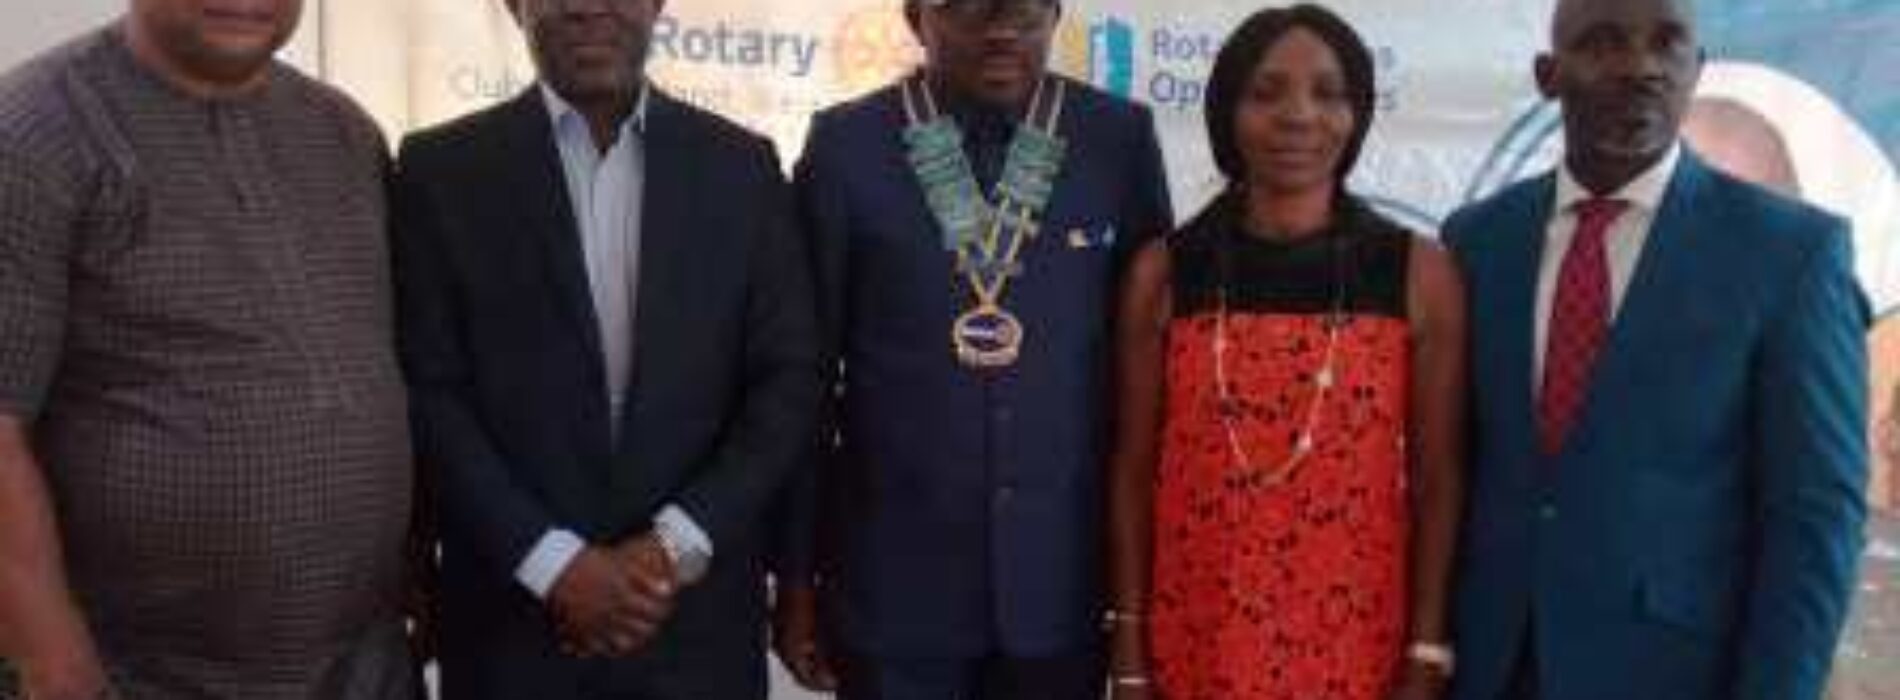 Rotary to commission N12.9m medical facilities in Ogun communities